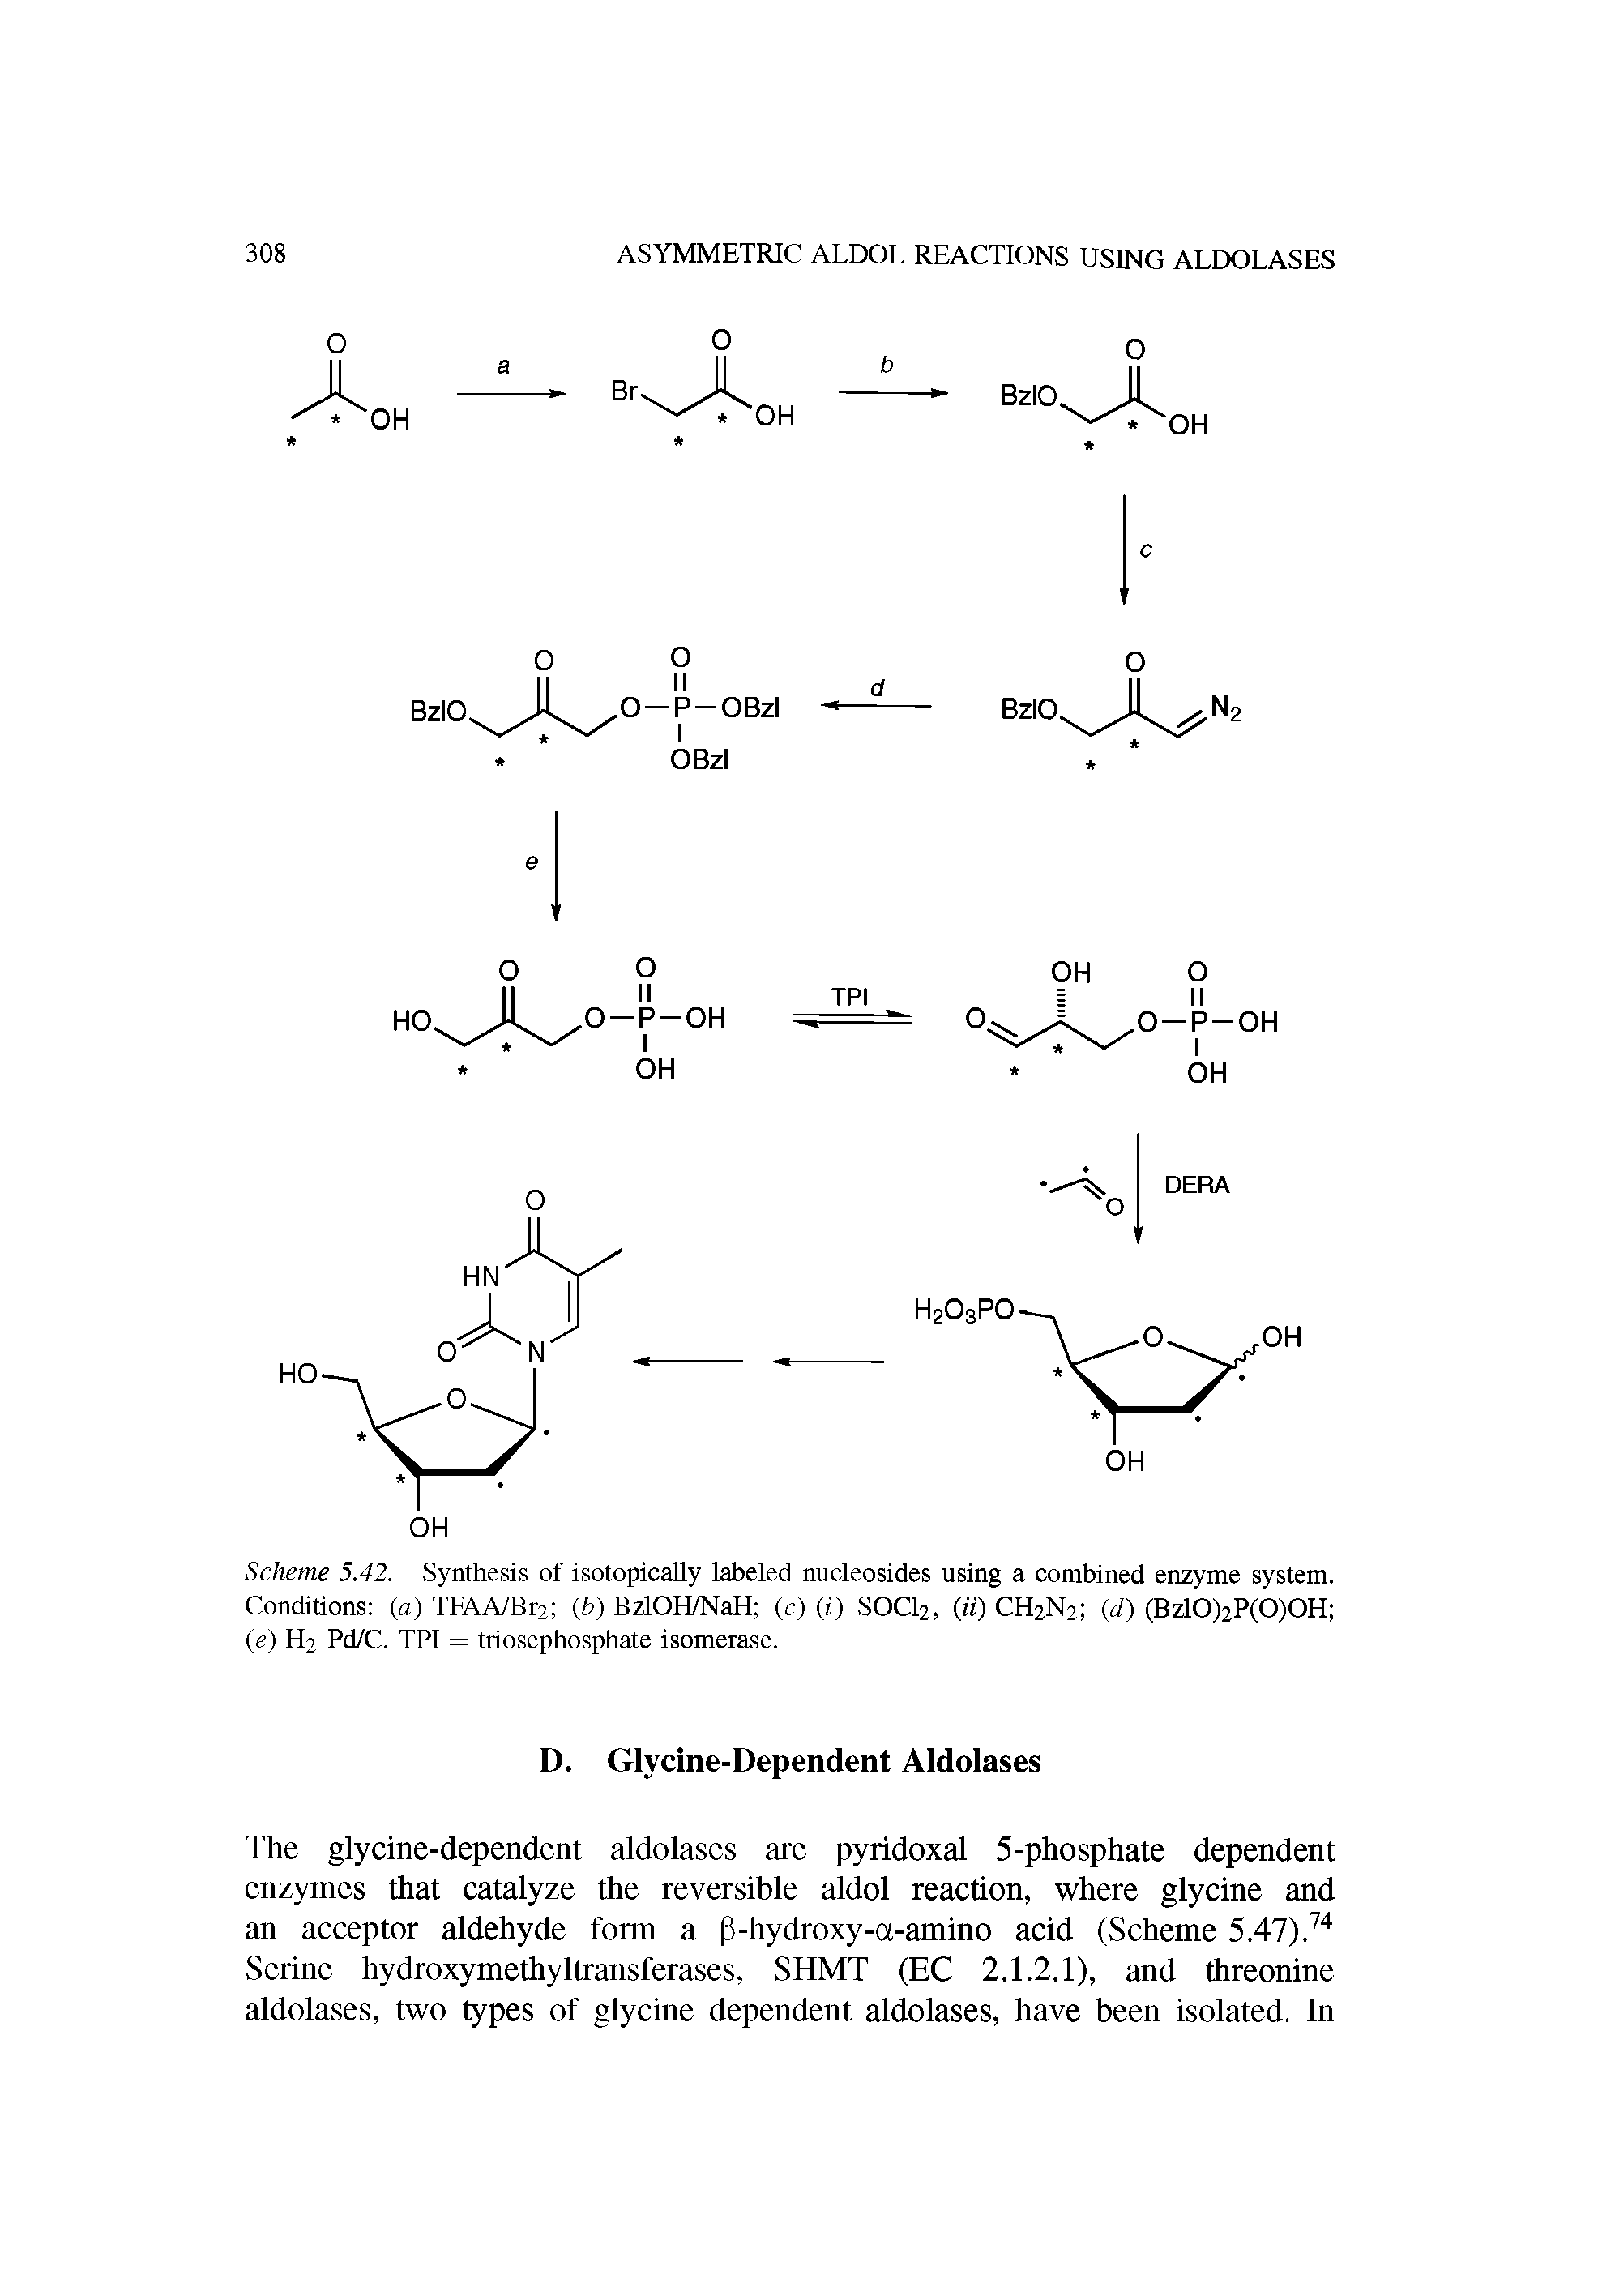 Scheme 5.42. Synthesis of isotopically labeled nucleosides using a combined enzyme system. Conditions (a) TFAA/Br2 (b) BzlOH/NaH (c) (i) SOCl2) (a) CH2N2 (d) (Bzl0)2P(0)0H (e) H2 Pd/C. TPI = triosephosphate isomerase.